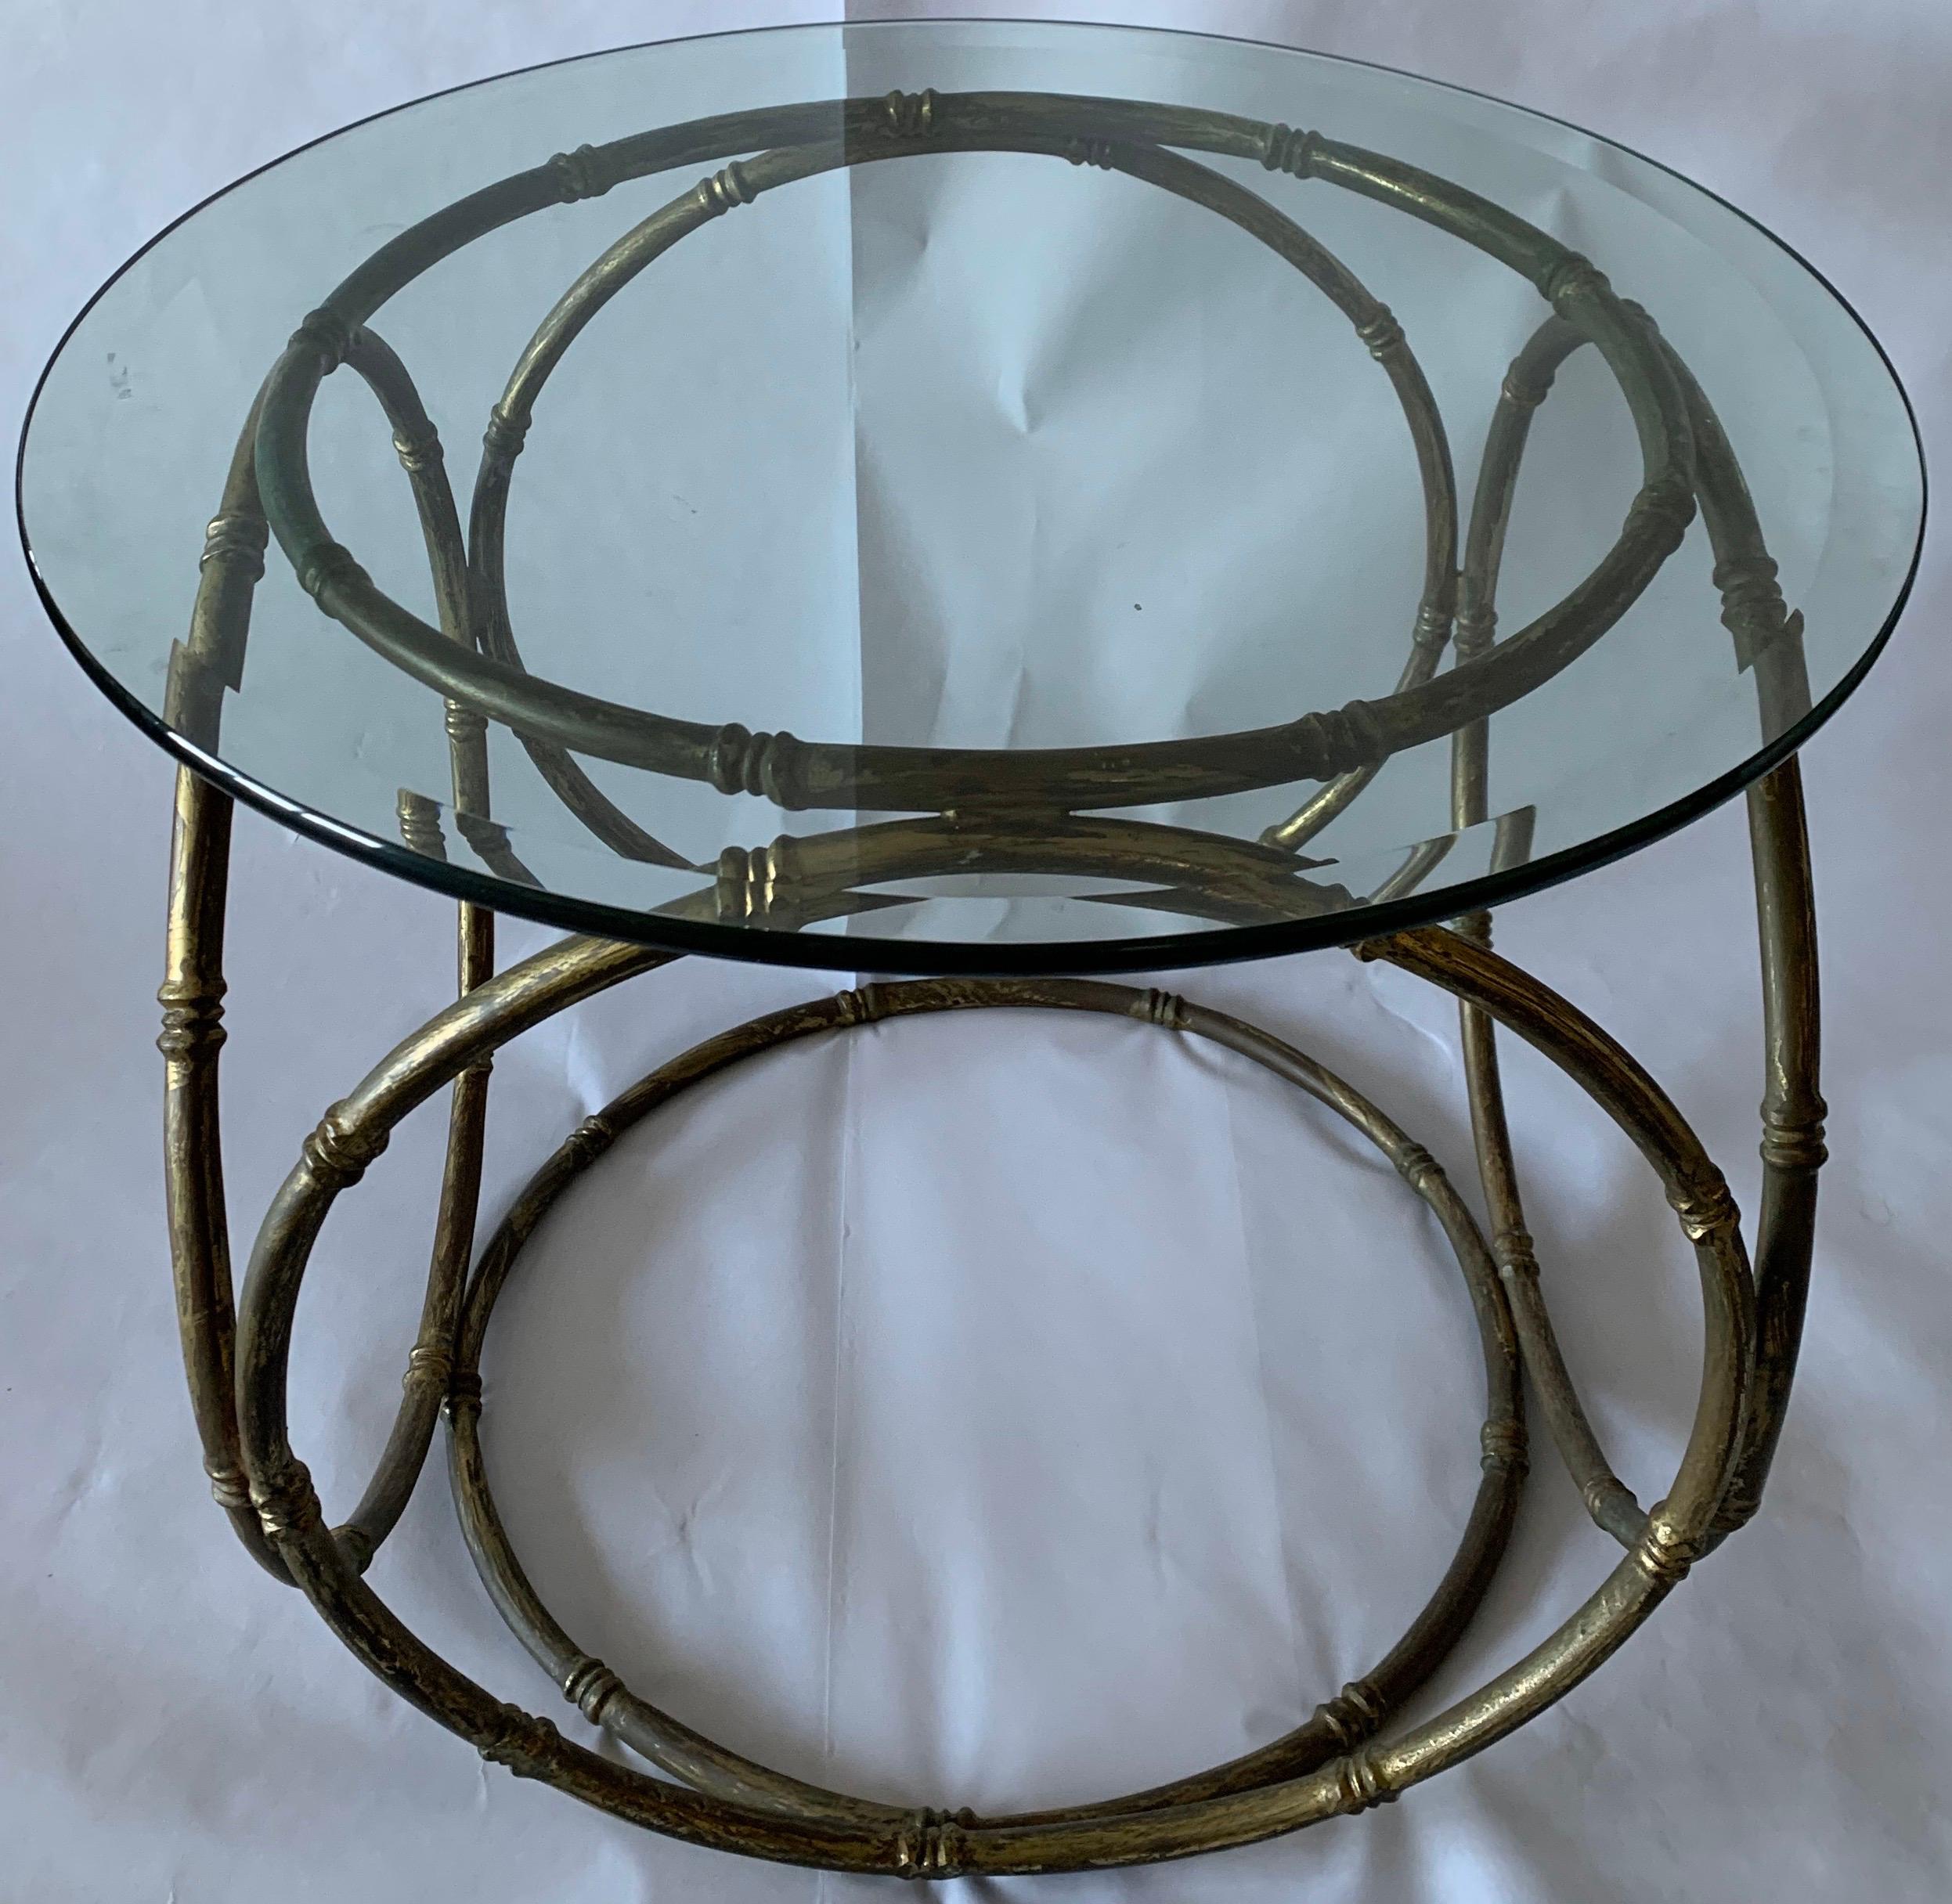 Midcentury French cast bronze bamboo style side table in the style of Maison Bagues. Heavy cast bronze base with new clear glass round top with beveled edge. No makers mark. The base could also be used with a larger or smaller glass top.